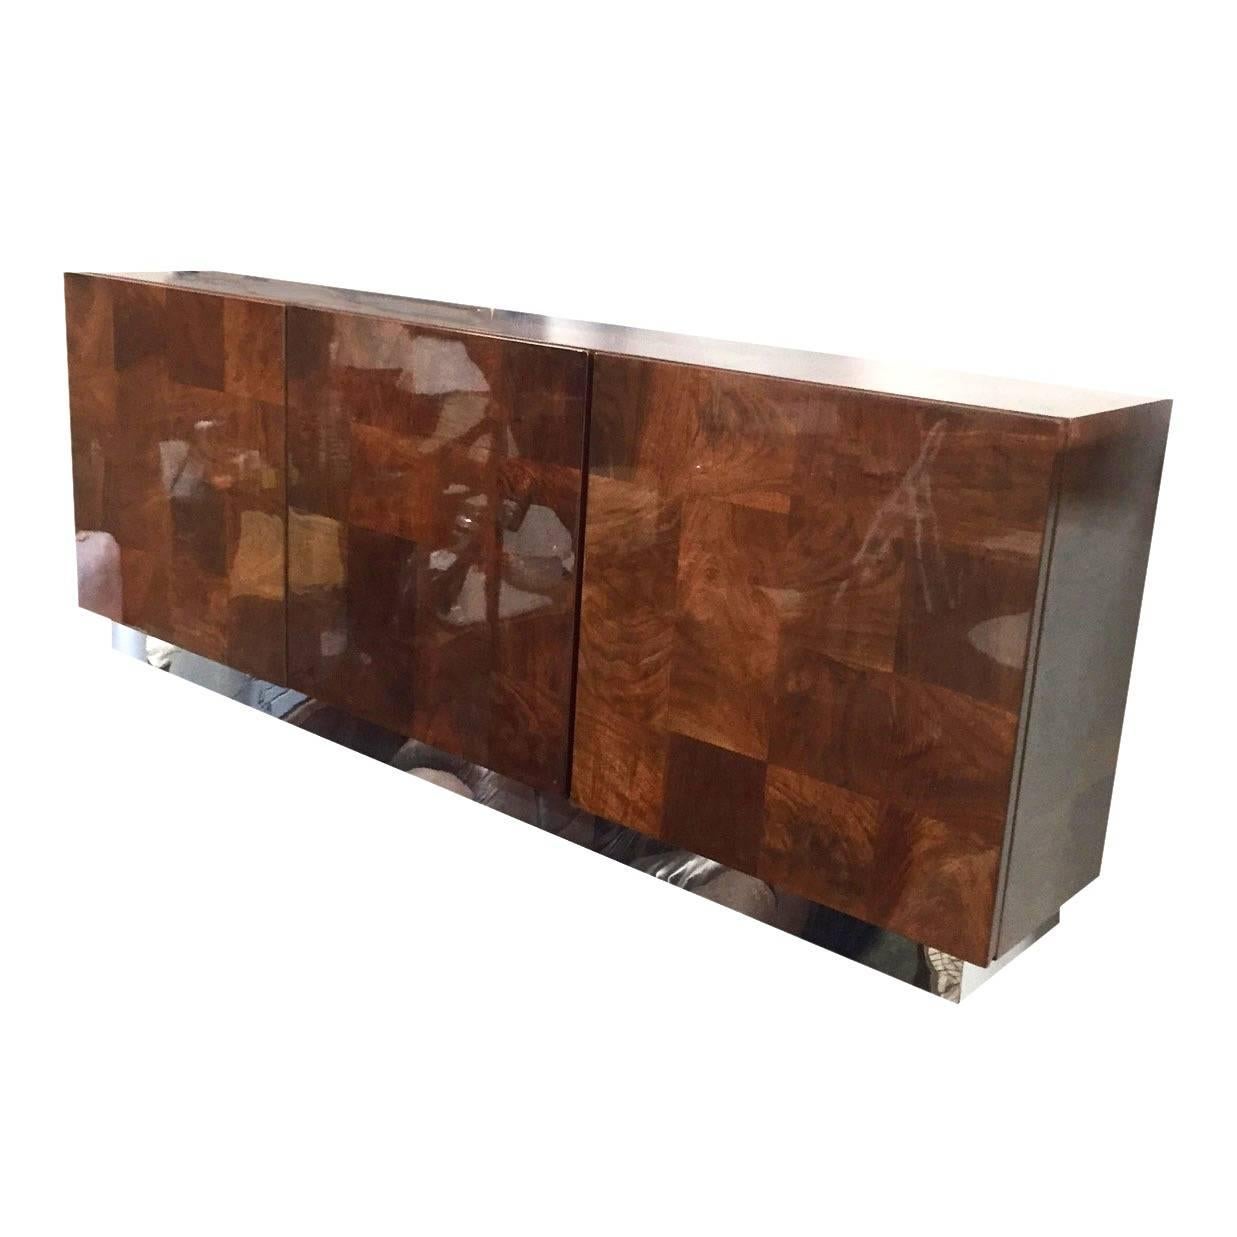 For sale is a beautiful Milo Baughman for Thayer Coggin patchwork credenza, very similar in look to work by Paul Evans.

The piece is in excellent condition, with very minor vintage wear as you can see in the photos.

Baughman was a leader in